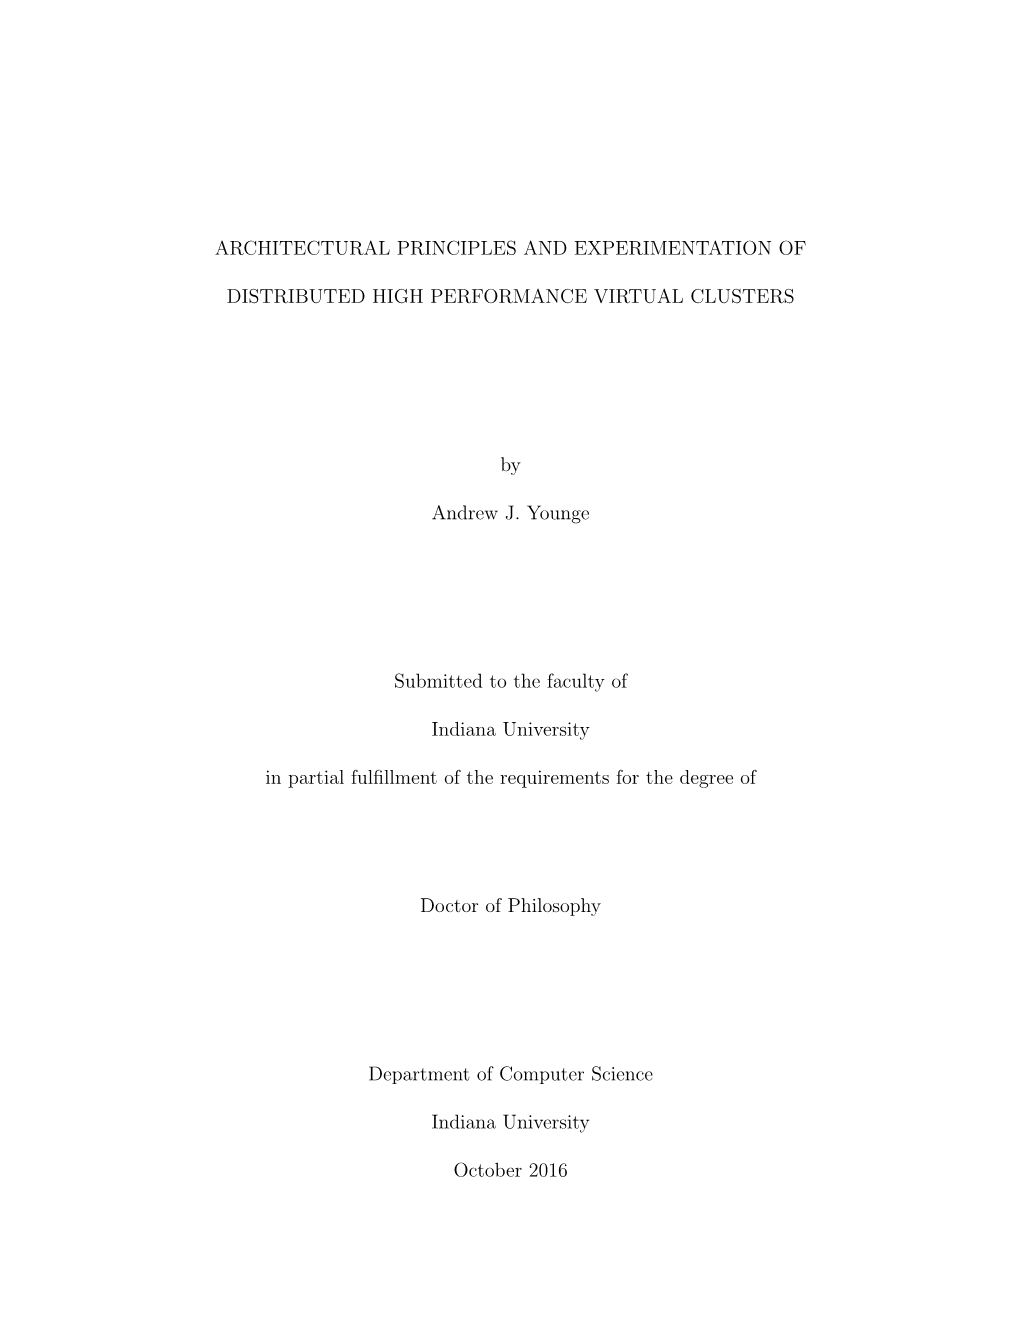 Younge Phd-Thesis.Pdf